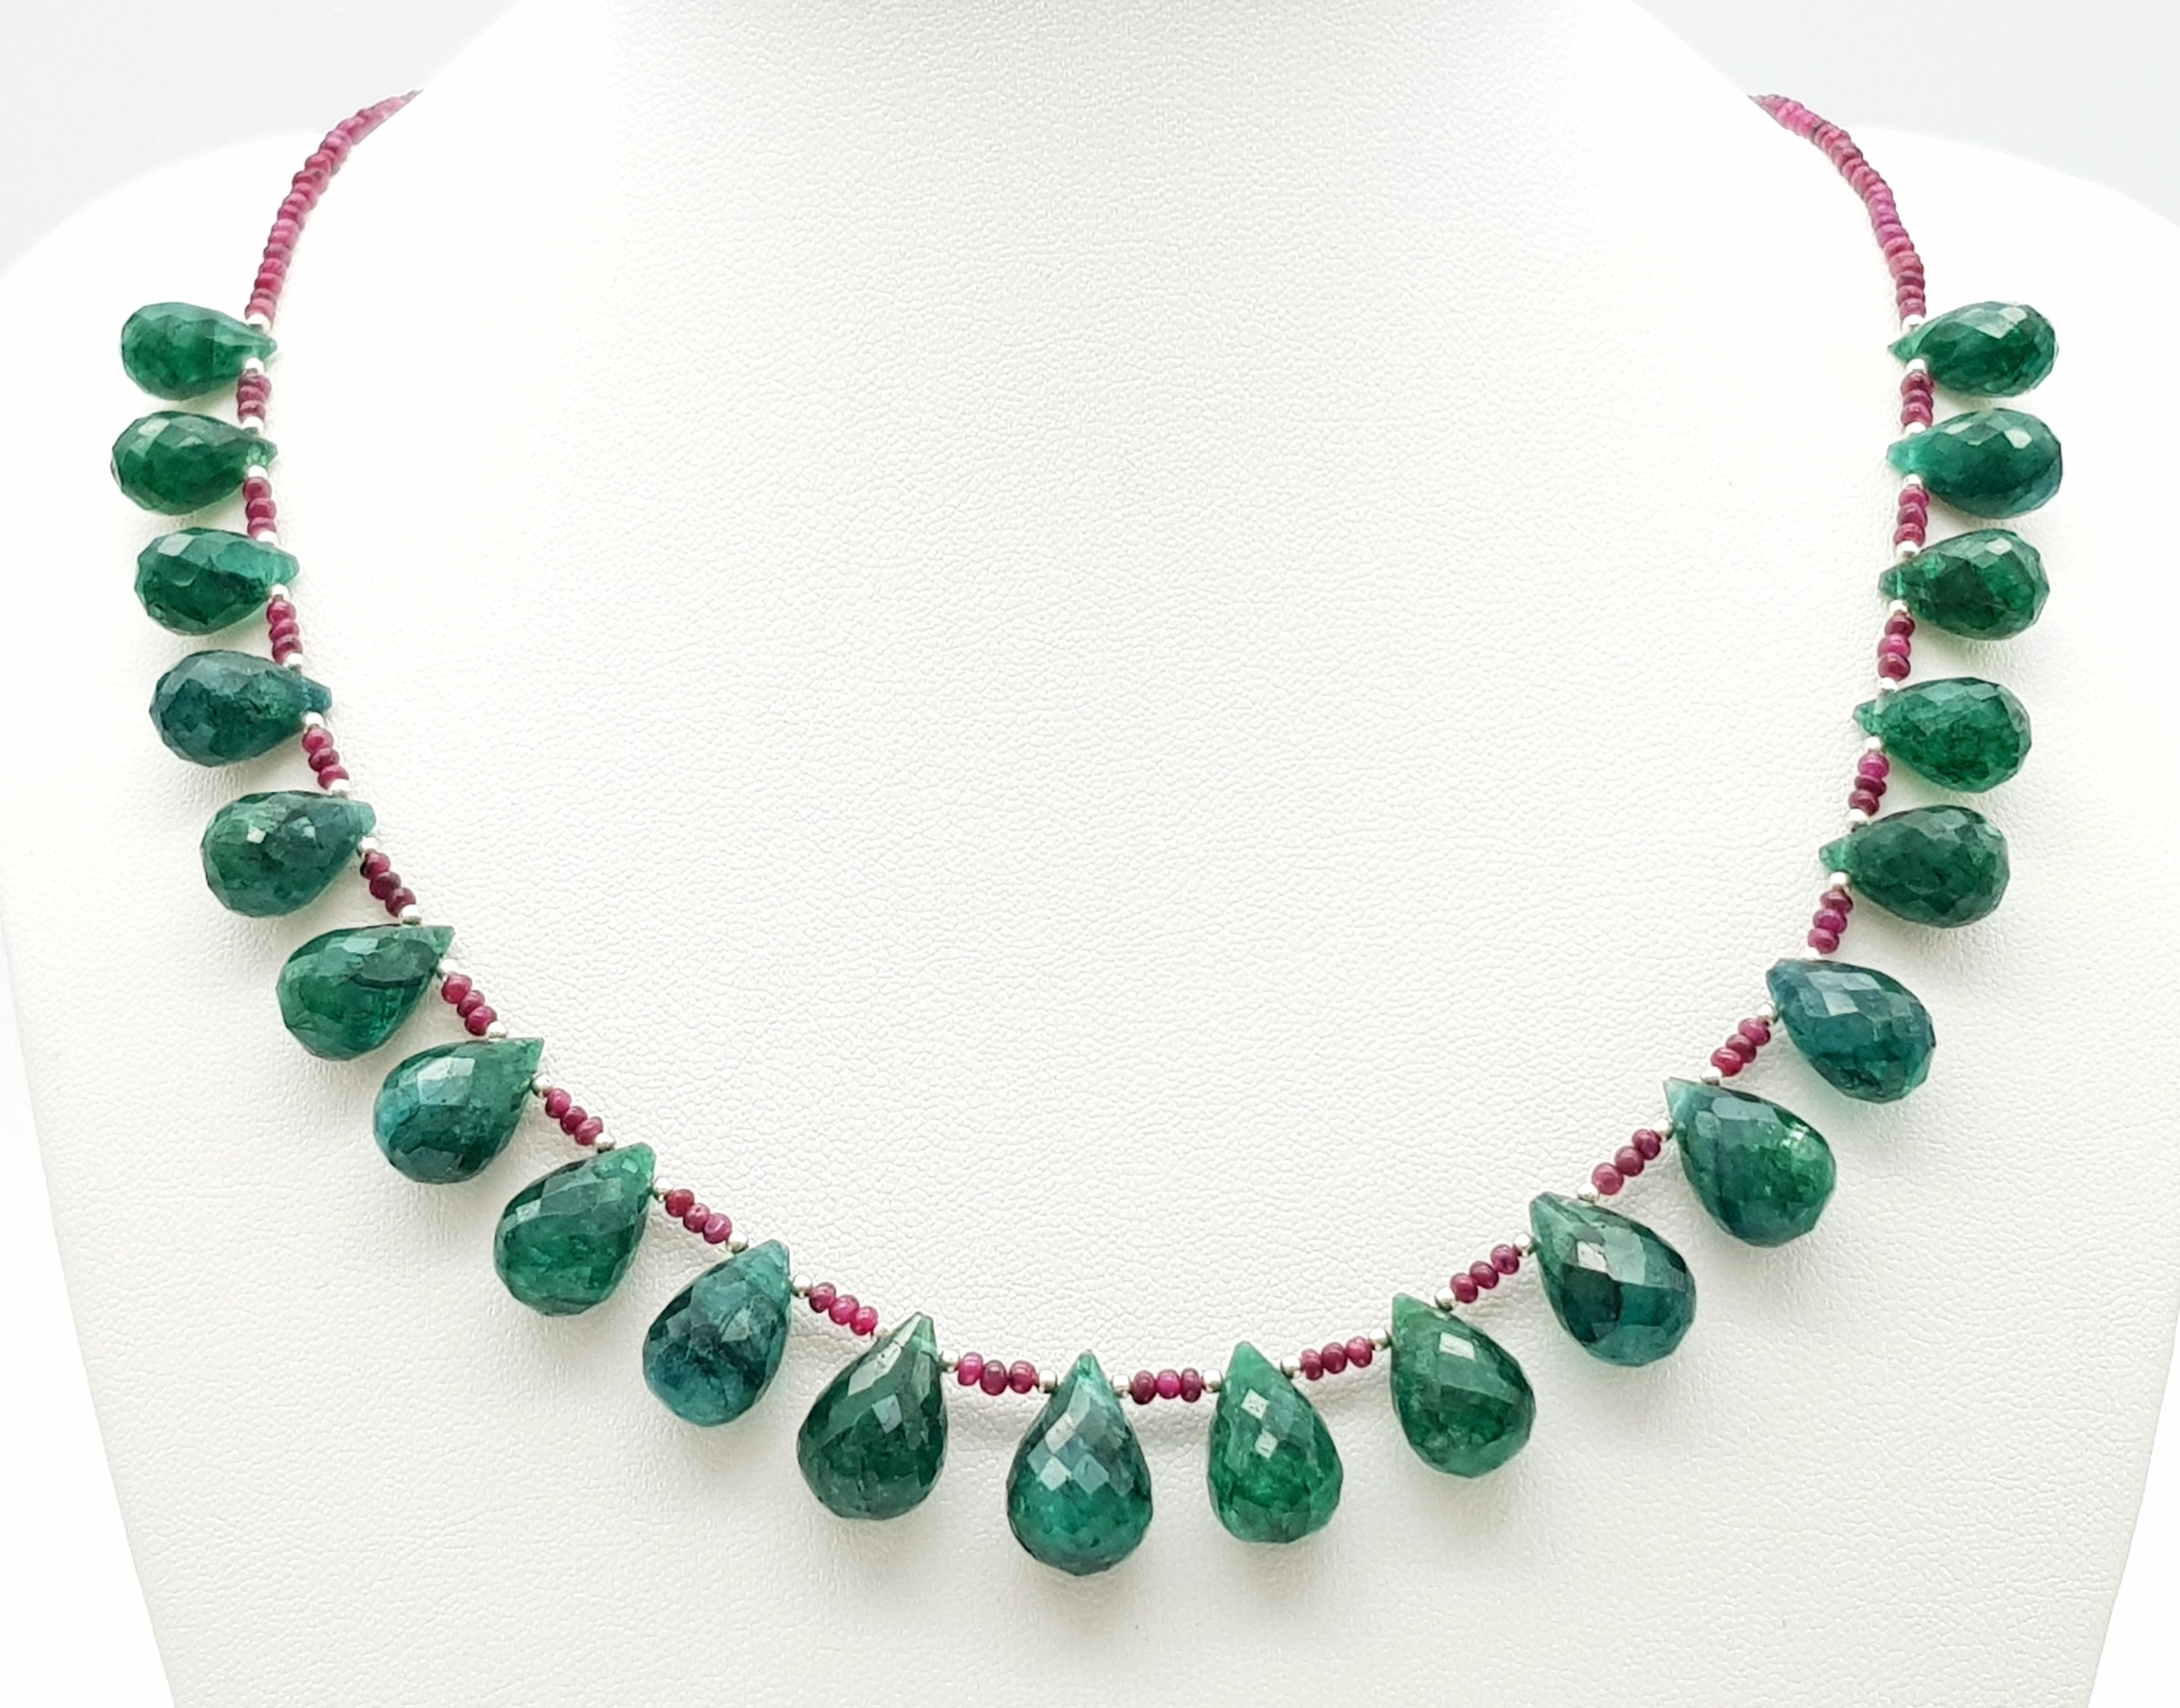 A 160ctw Emerald Teardrop Necklace with Ruby Spacer Beads And a Pair Matching Drop Earrings. 44cm - Image 2 of 5